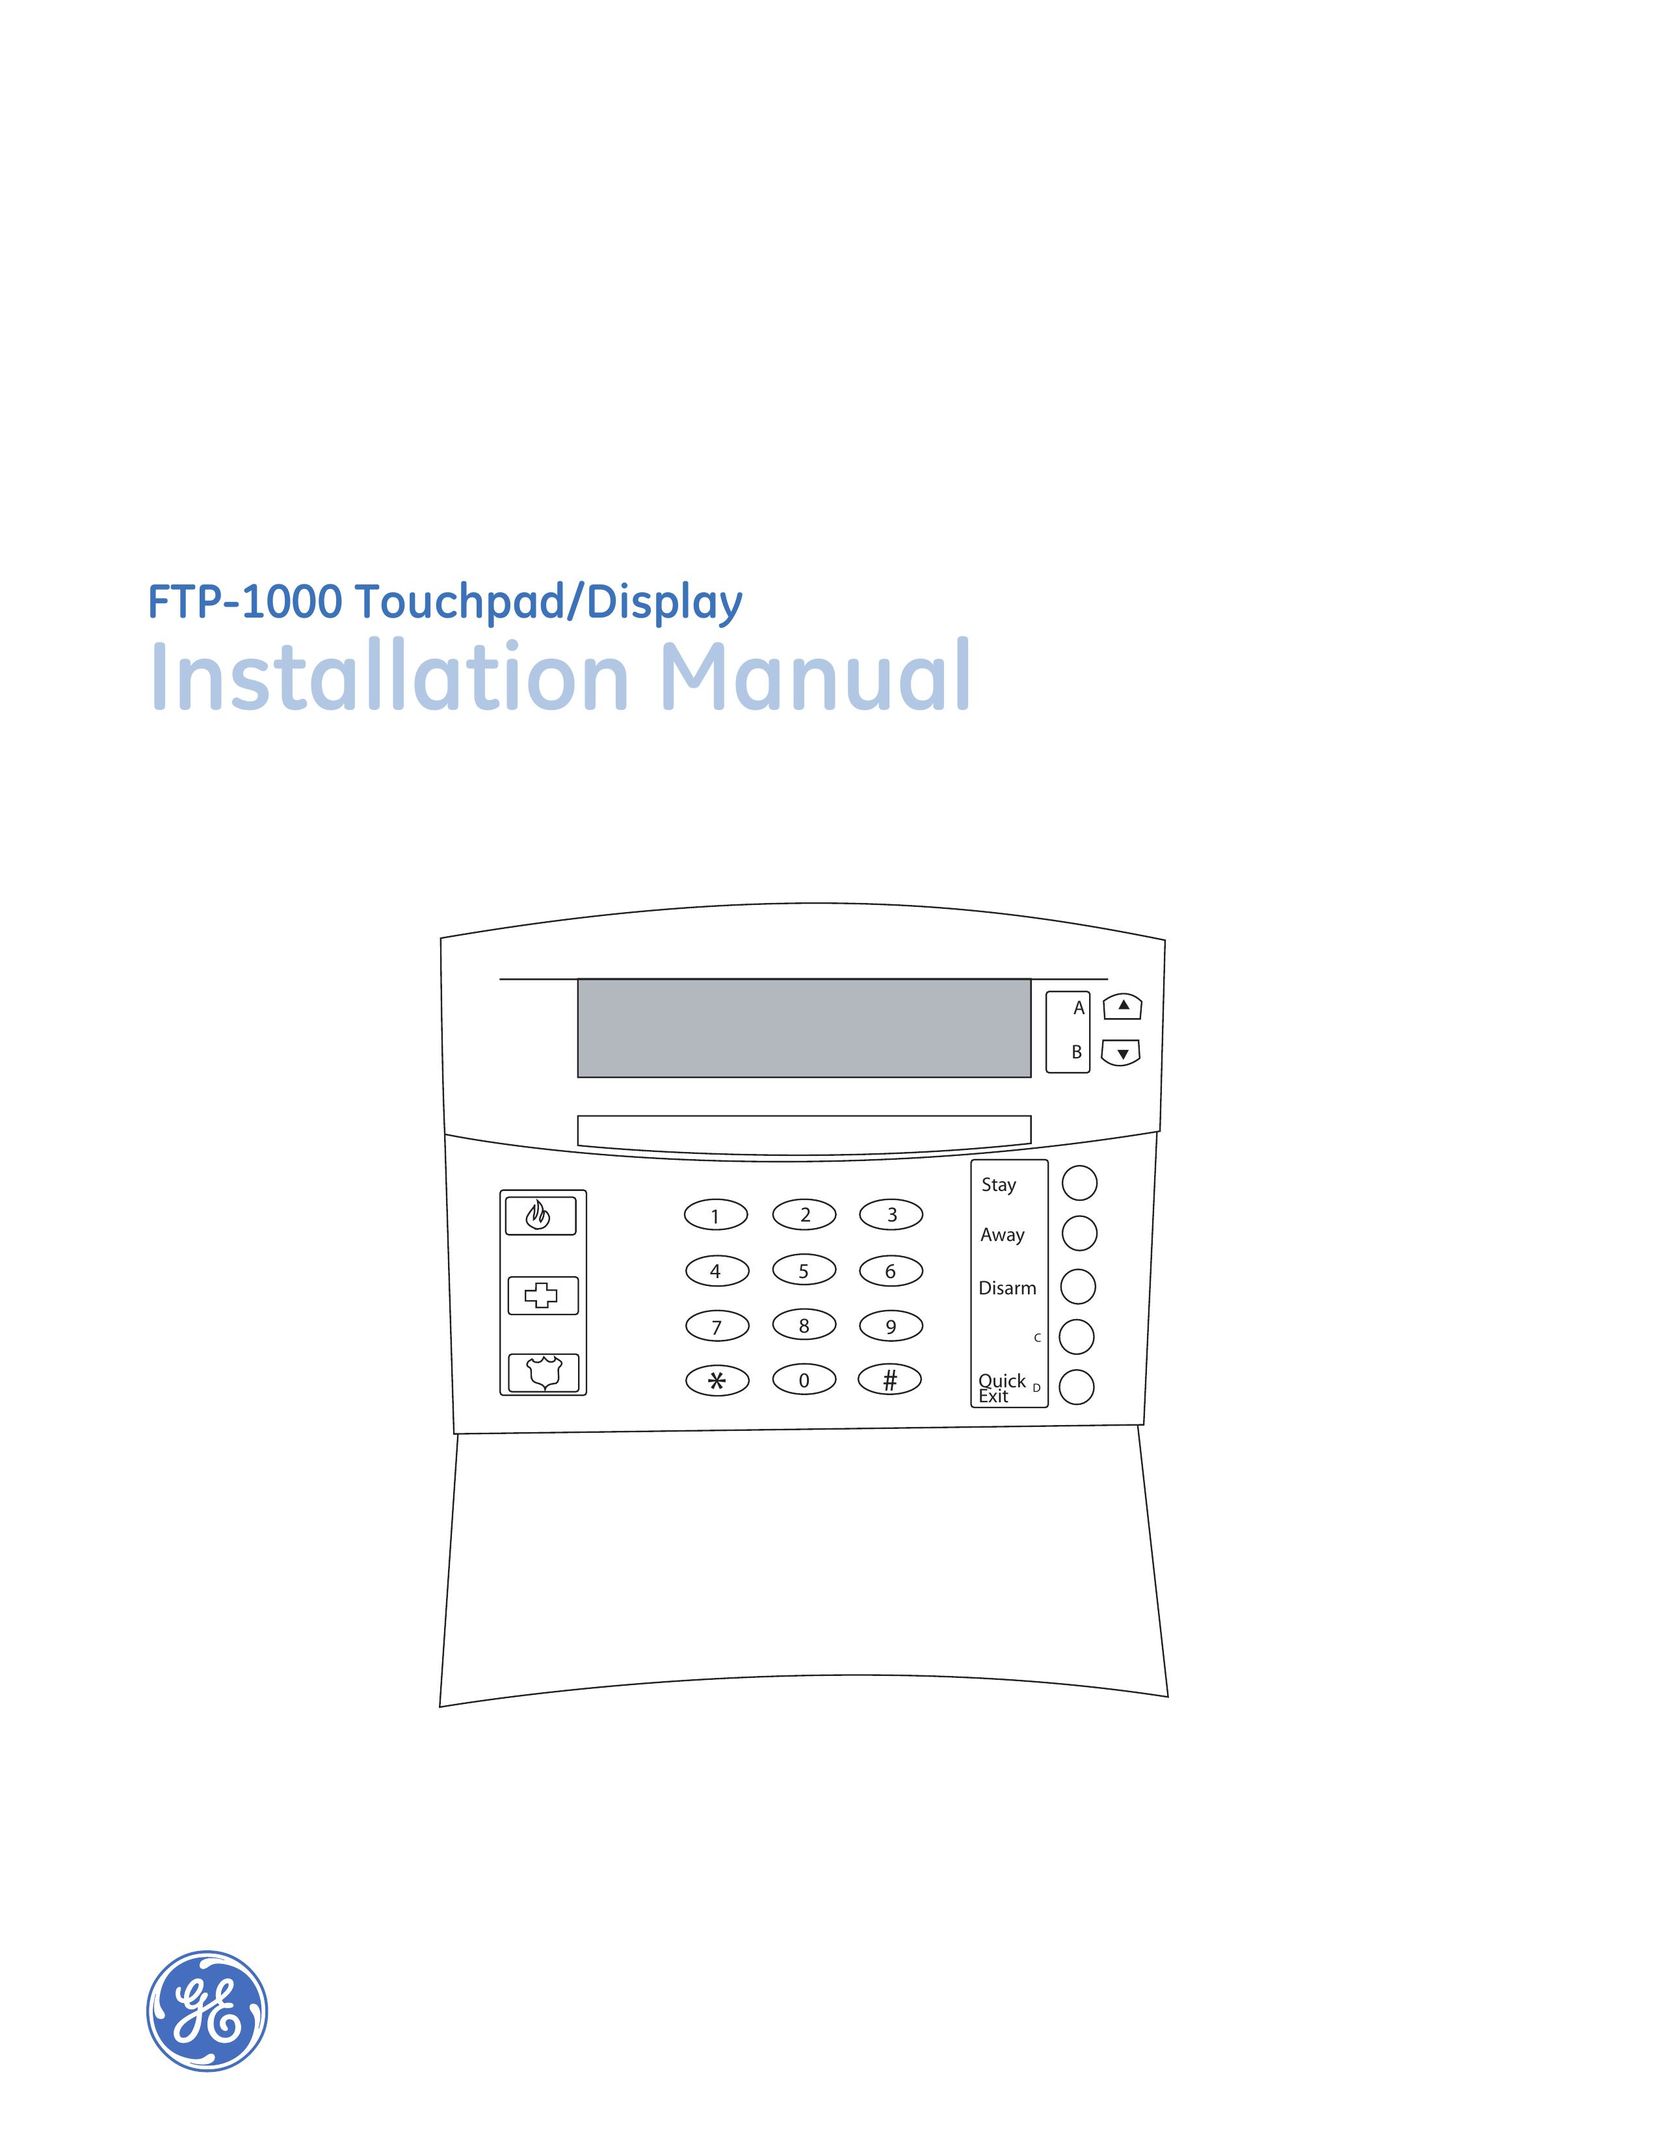 GE FTP-1000 Home Security System User Manual